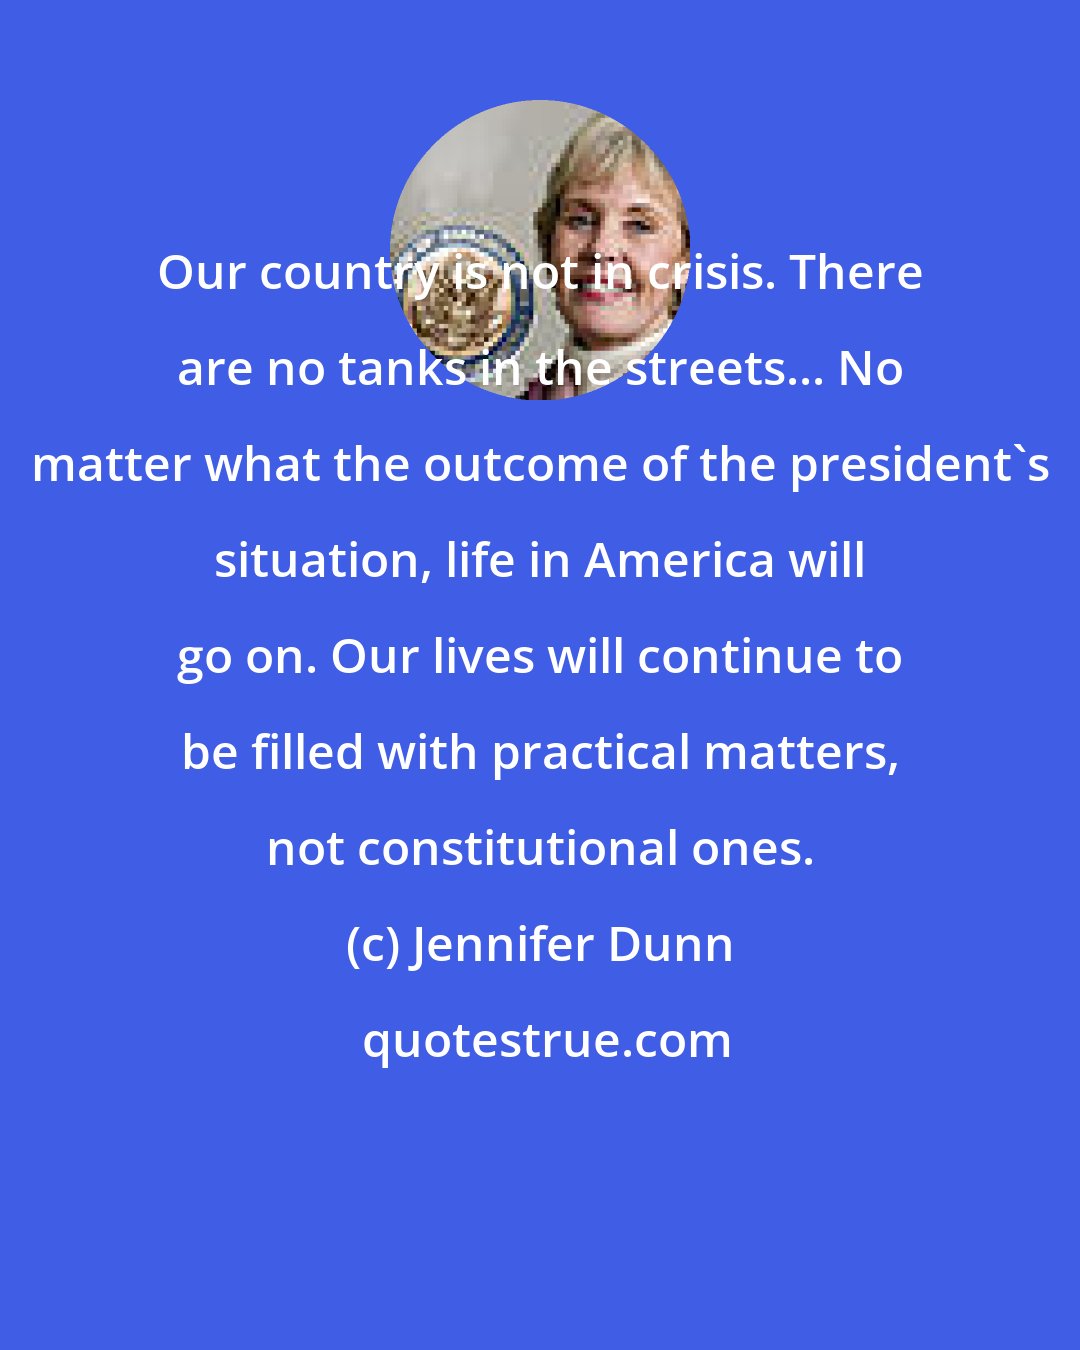 Jennifer Dunn: Our country is not in crisis. There are no tanks in the streets... No matter what the outcome of the president's situation, life in America will go on. Our lives will continue to be filled with practical matters, not constitutional ones.